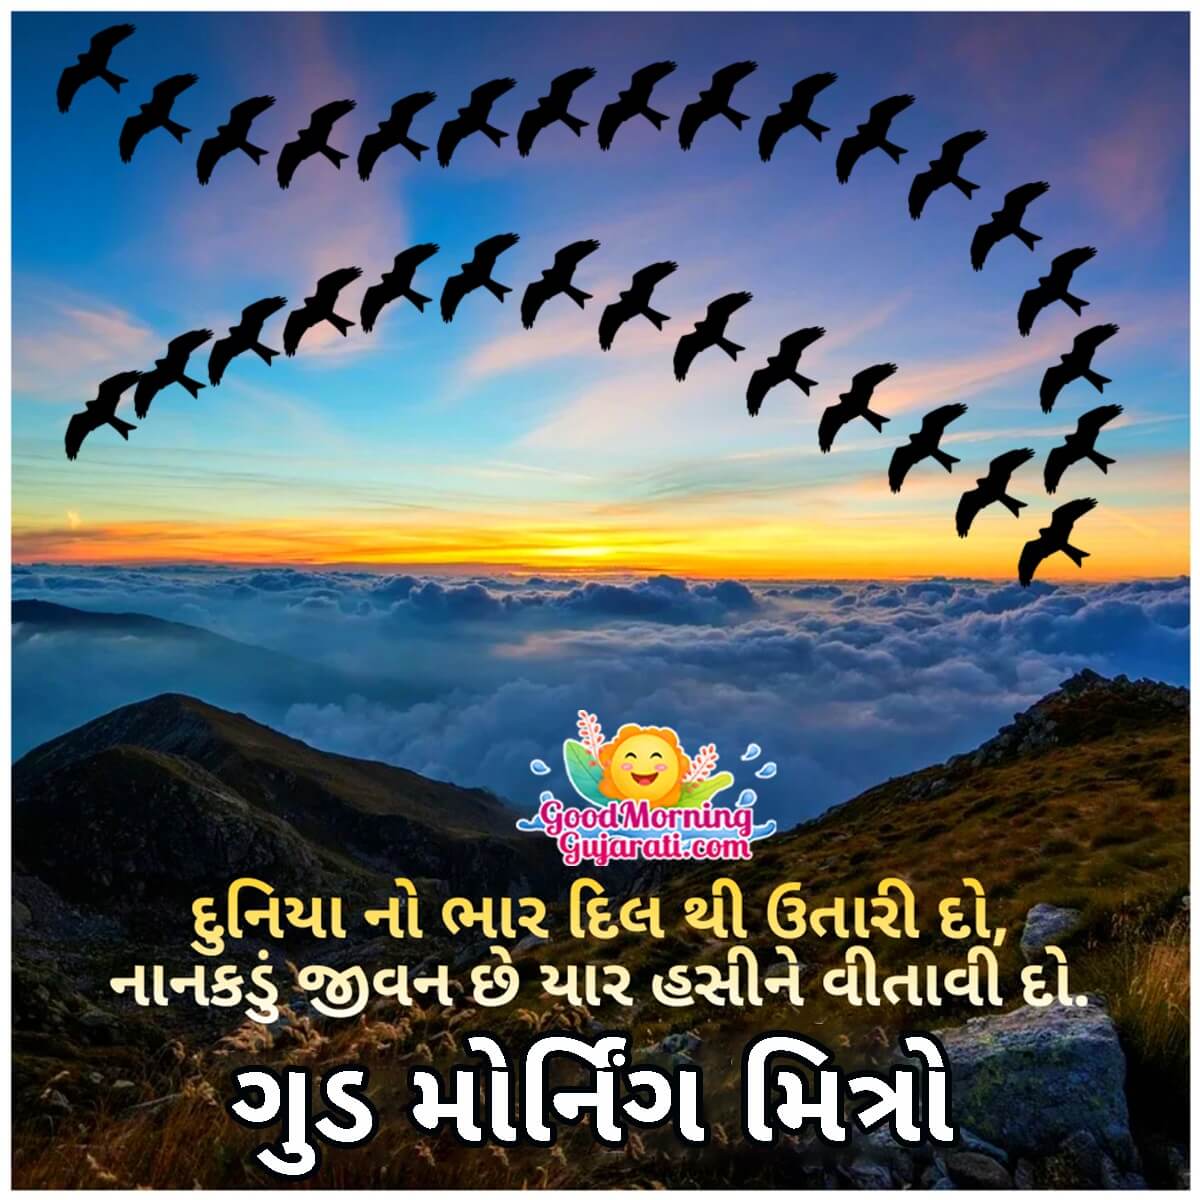 Good Morning Gujarati Quotes Images - Good Morning Wishes & Images ...